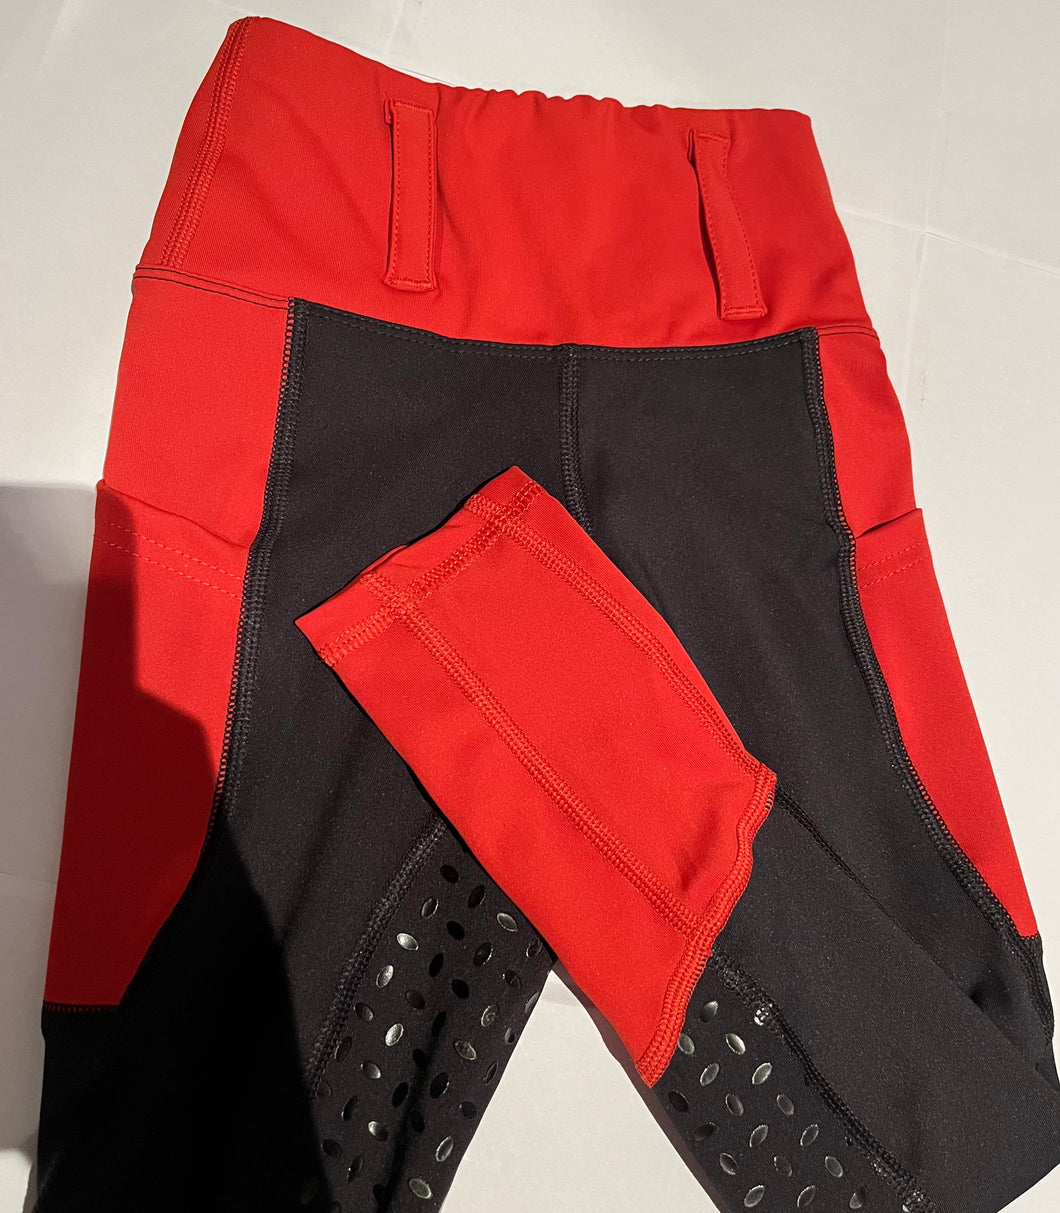 Child’s red and black tights